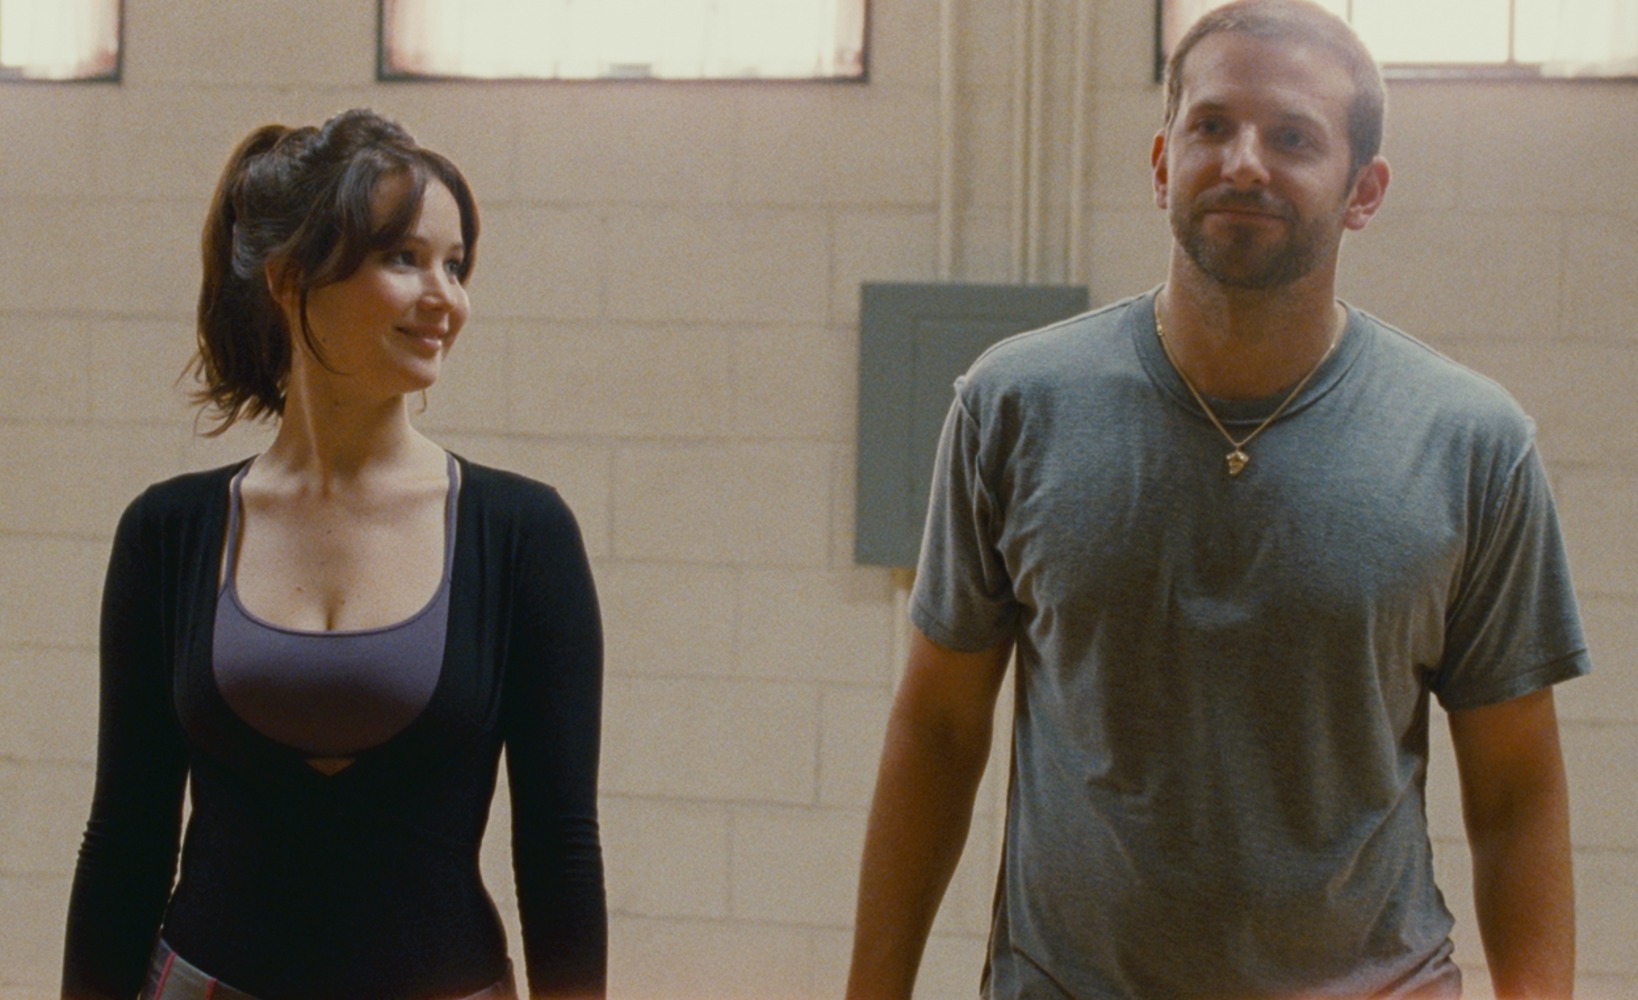 happiness-therapy-silver-linings-playbook-30-01-2013-16-_007.jpg